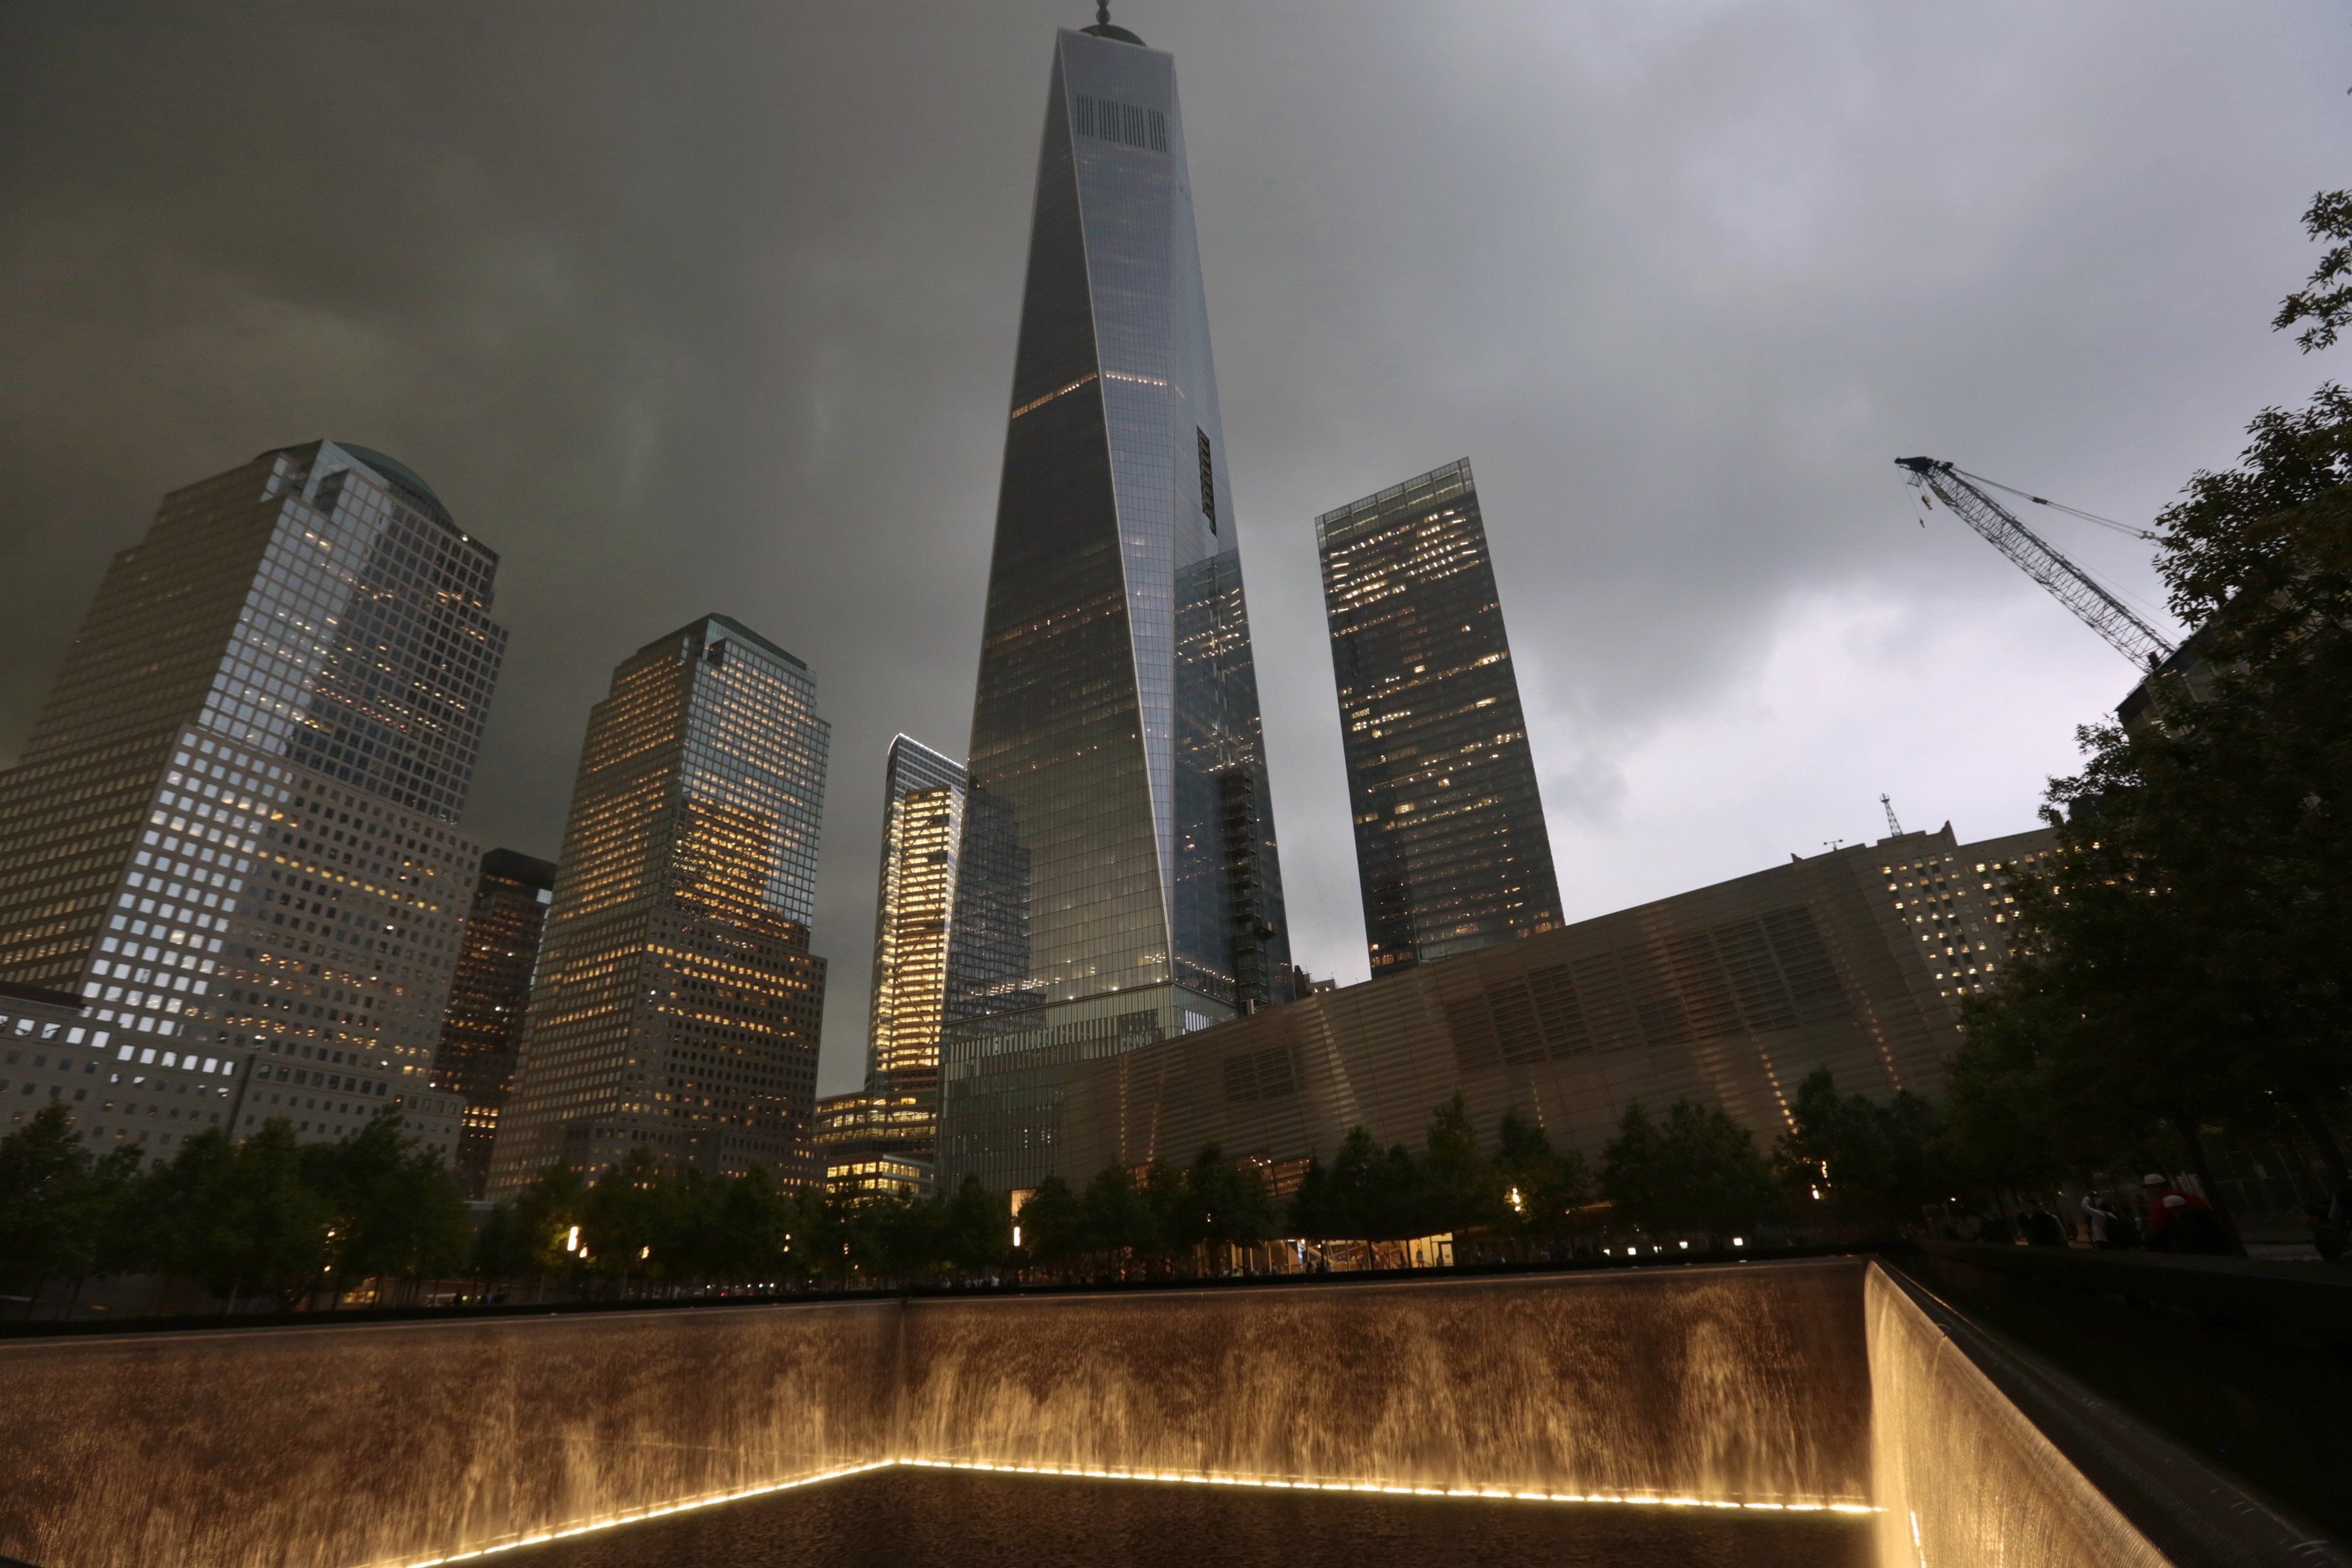 The 9/11 Memorial Museum in New York, low building in center-right of frame, is now open to the public. Photographed on May 23, 2014. (Carolyn Cole/Los Angeles Times/MCT)